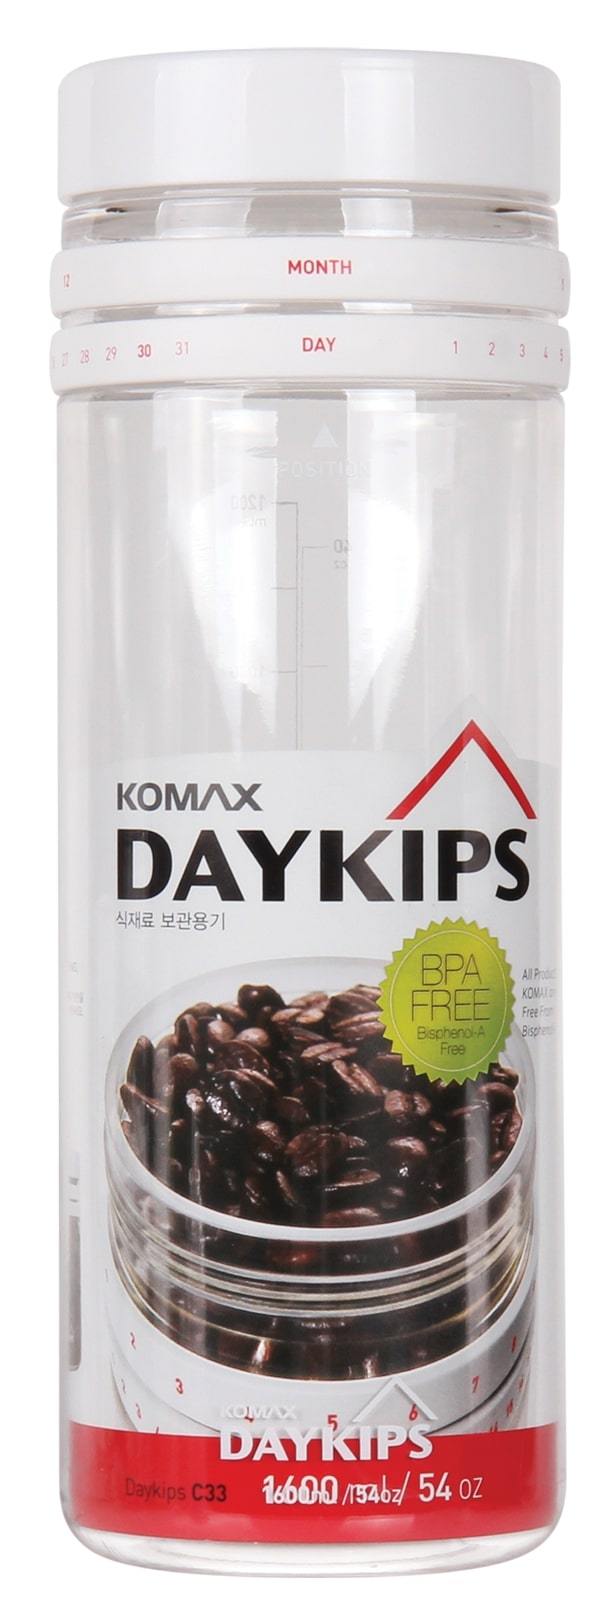 Komax Daykips Dry Food Canister, 1.6 L